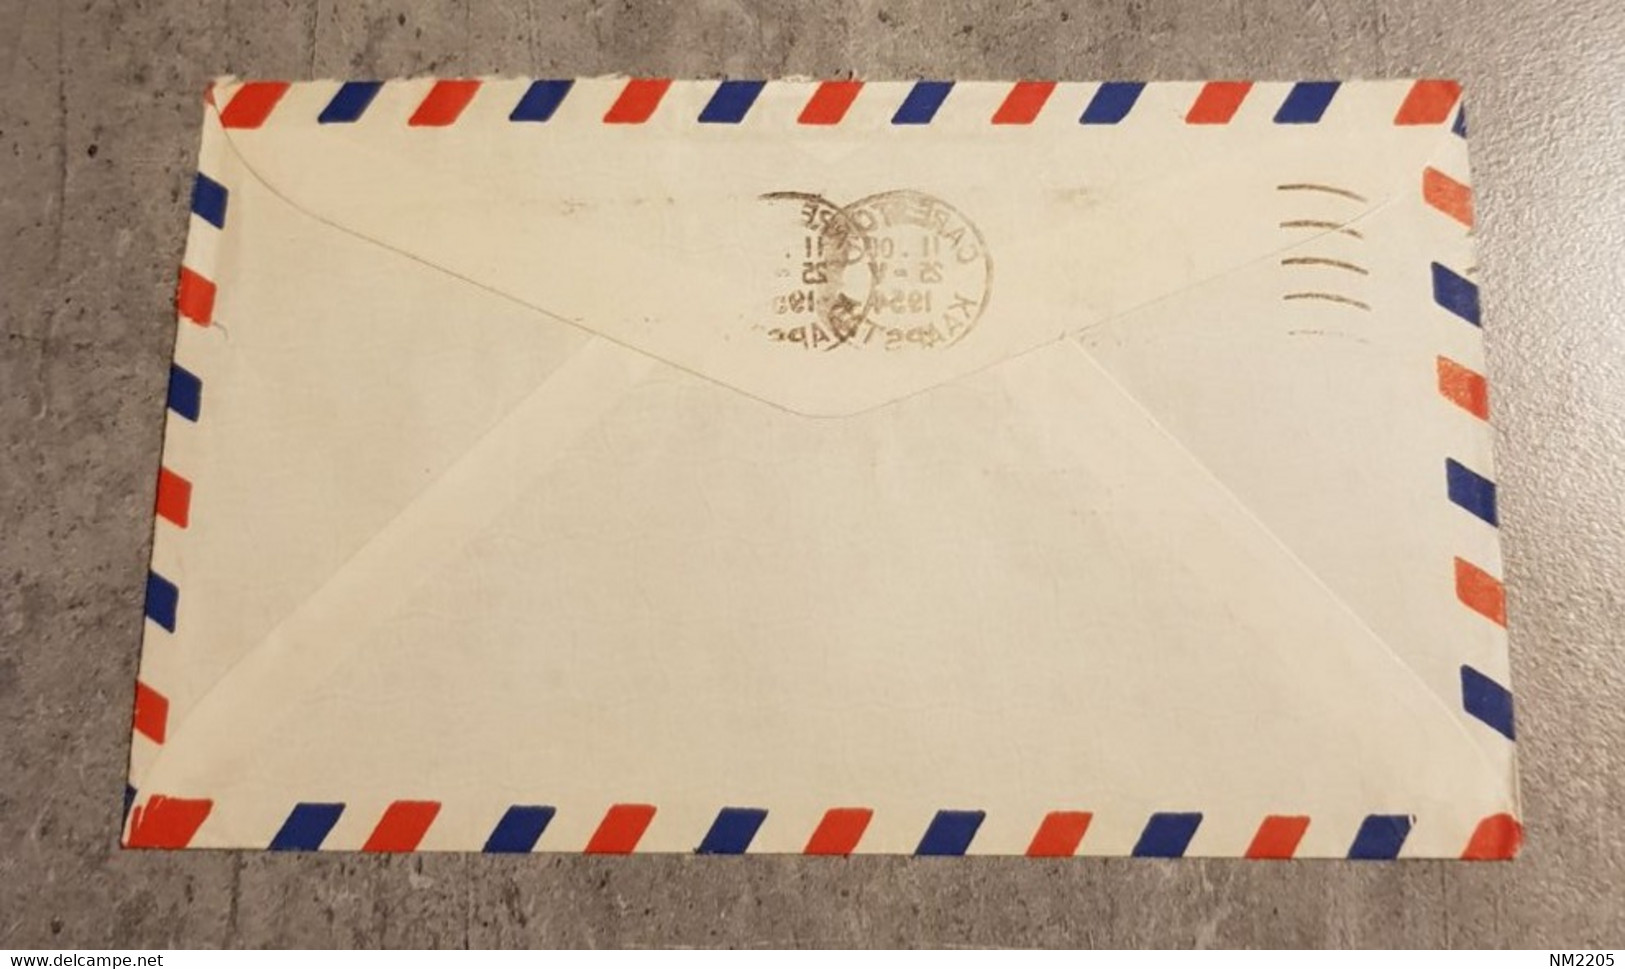 SOUTH AFRICA AIR MAIL COVER CIRCULED SEND TO GERMANY - Luftpost